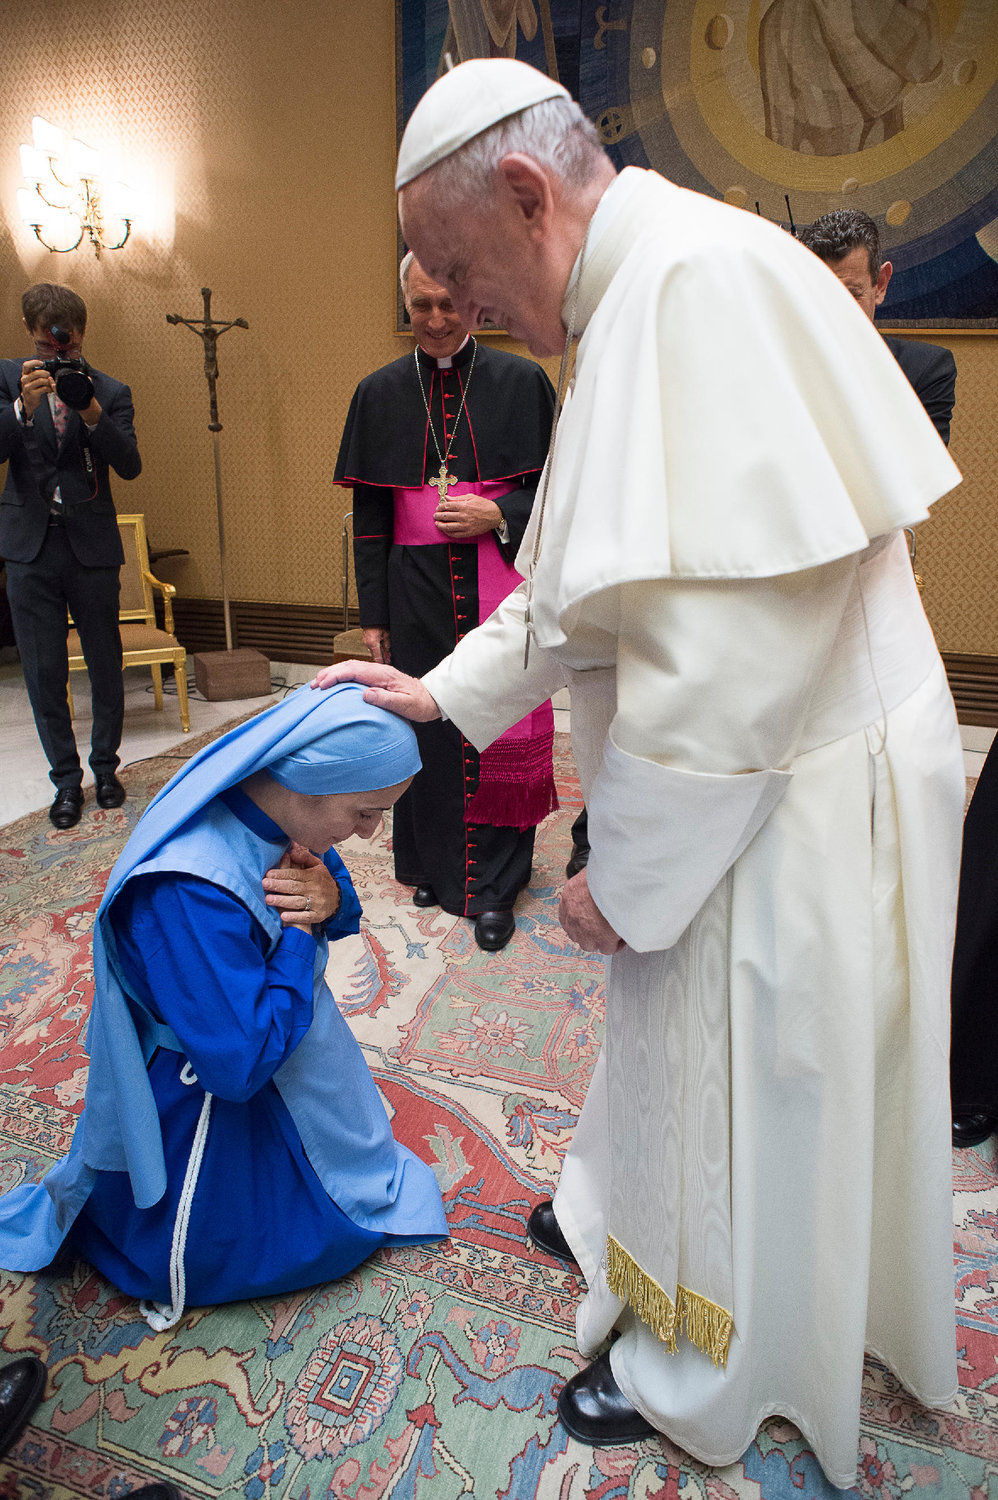 Mother Olga of the Sacred Heart is the founder and mother servant of the Daughters of Mary of Nazareth, a Roman Catholic religious order in the Archdiocese of Boston. At left, Pope Francis offers a blessing upon Mother Olga during a visit together.